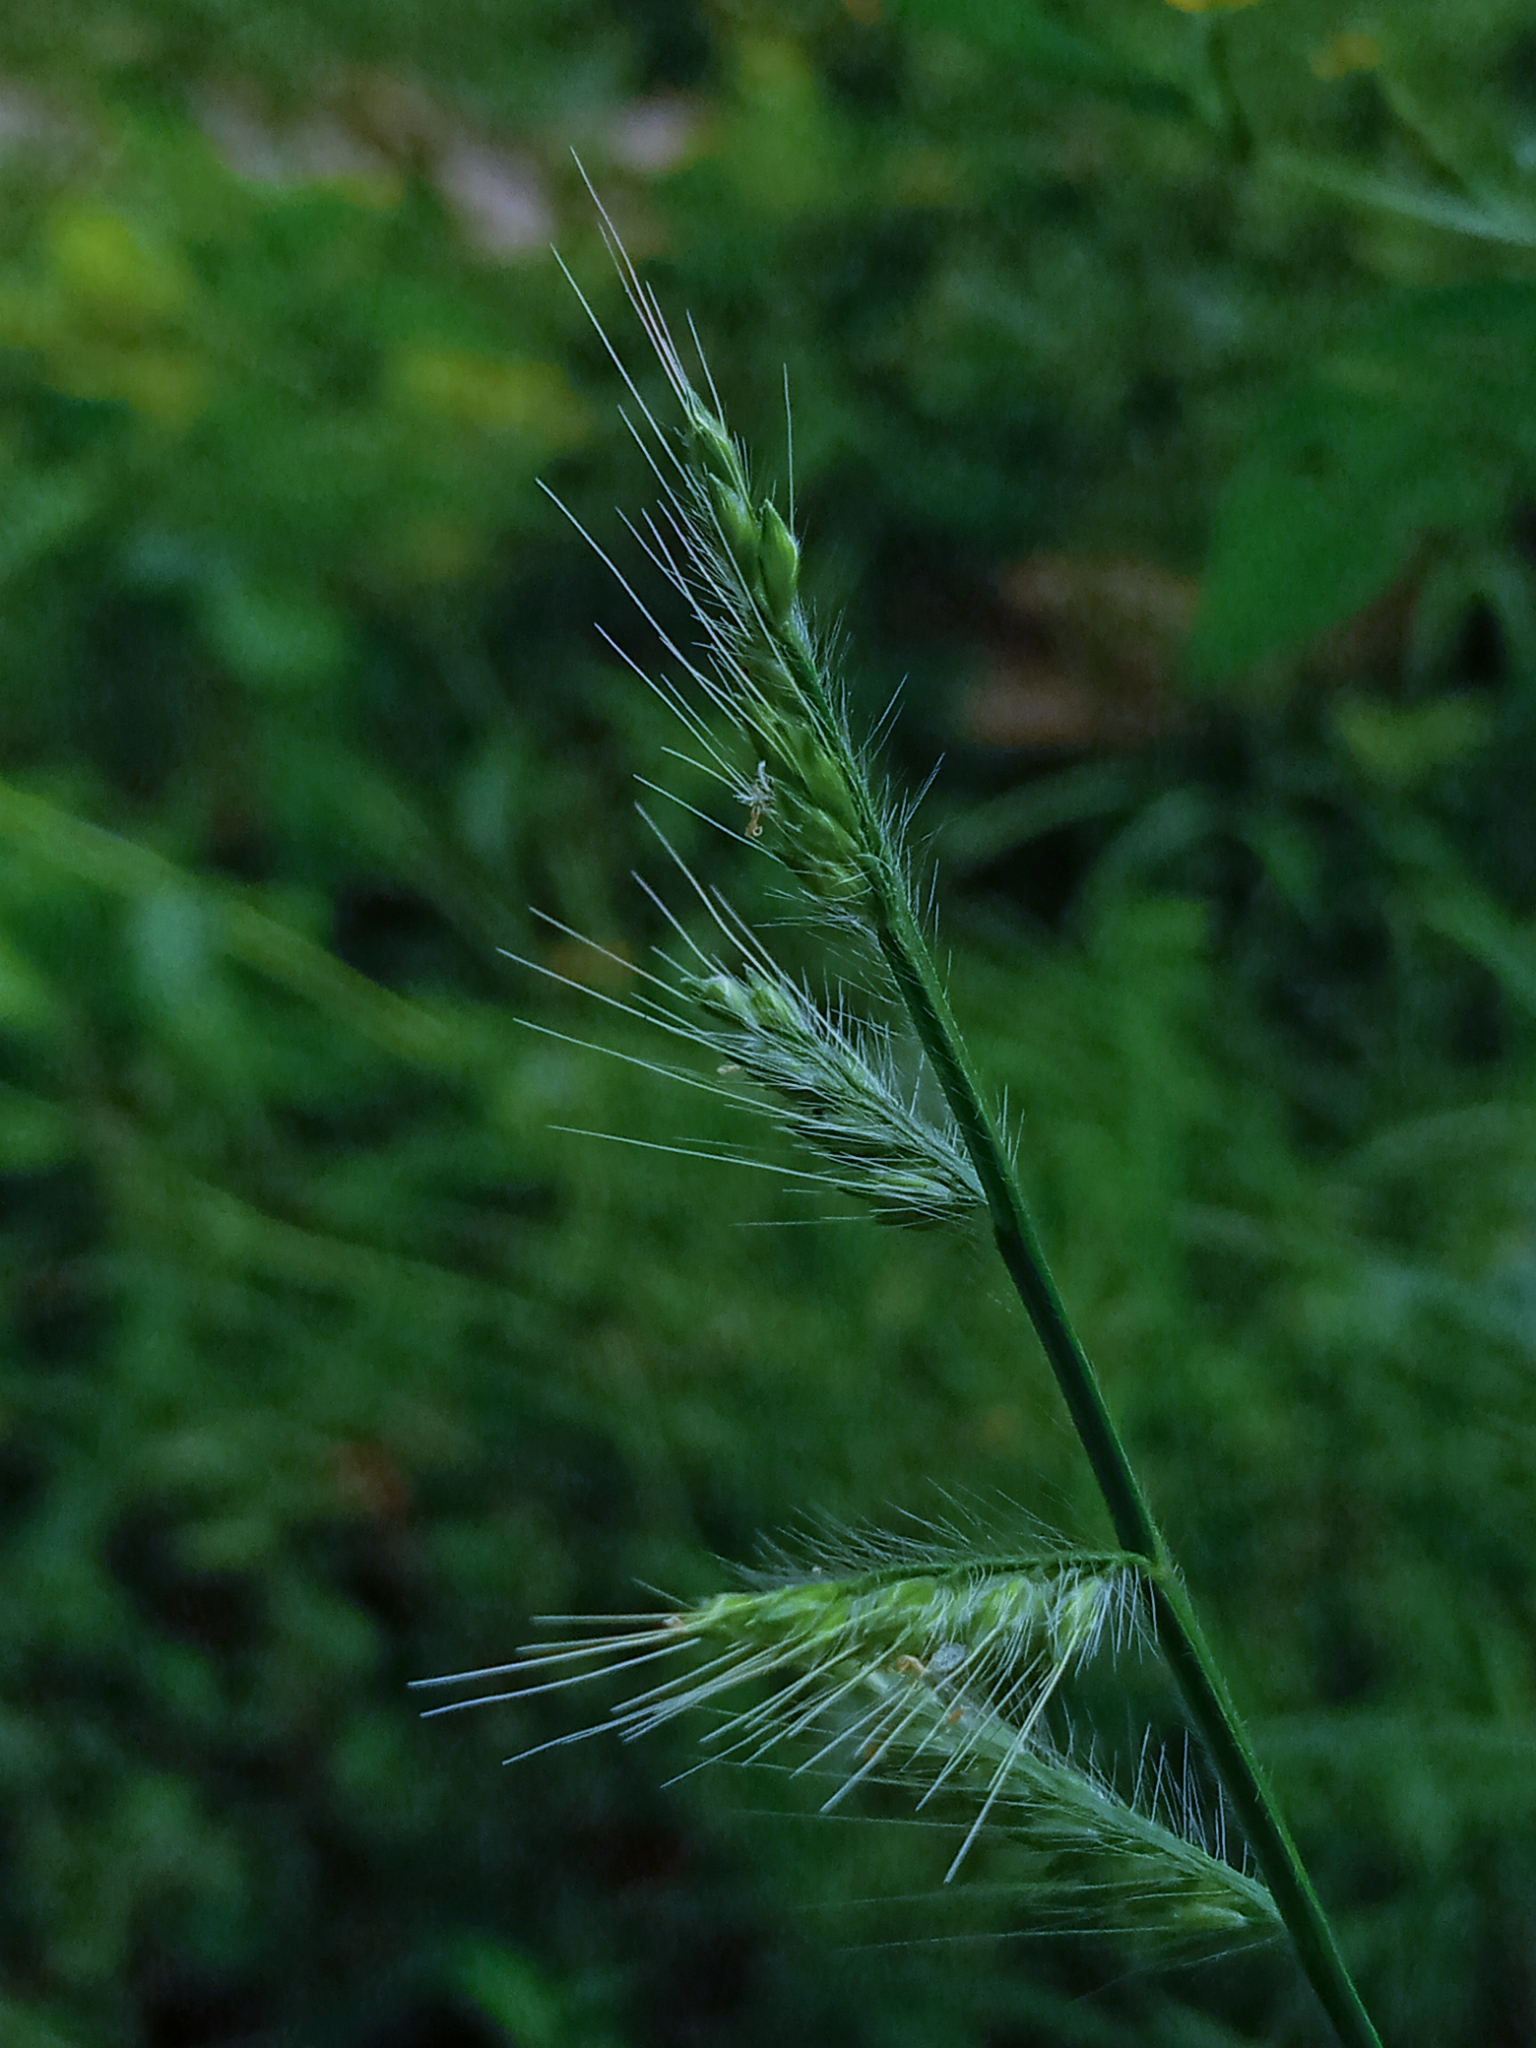 A type of grass plant